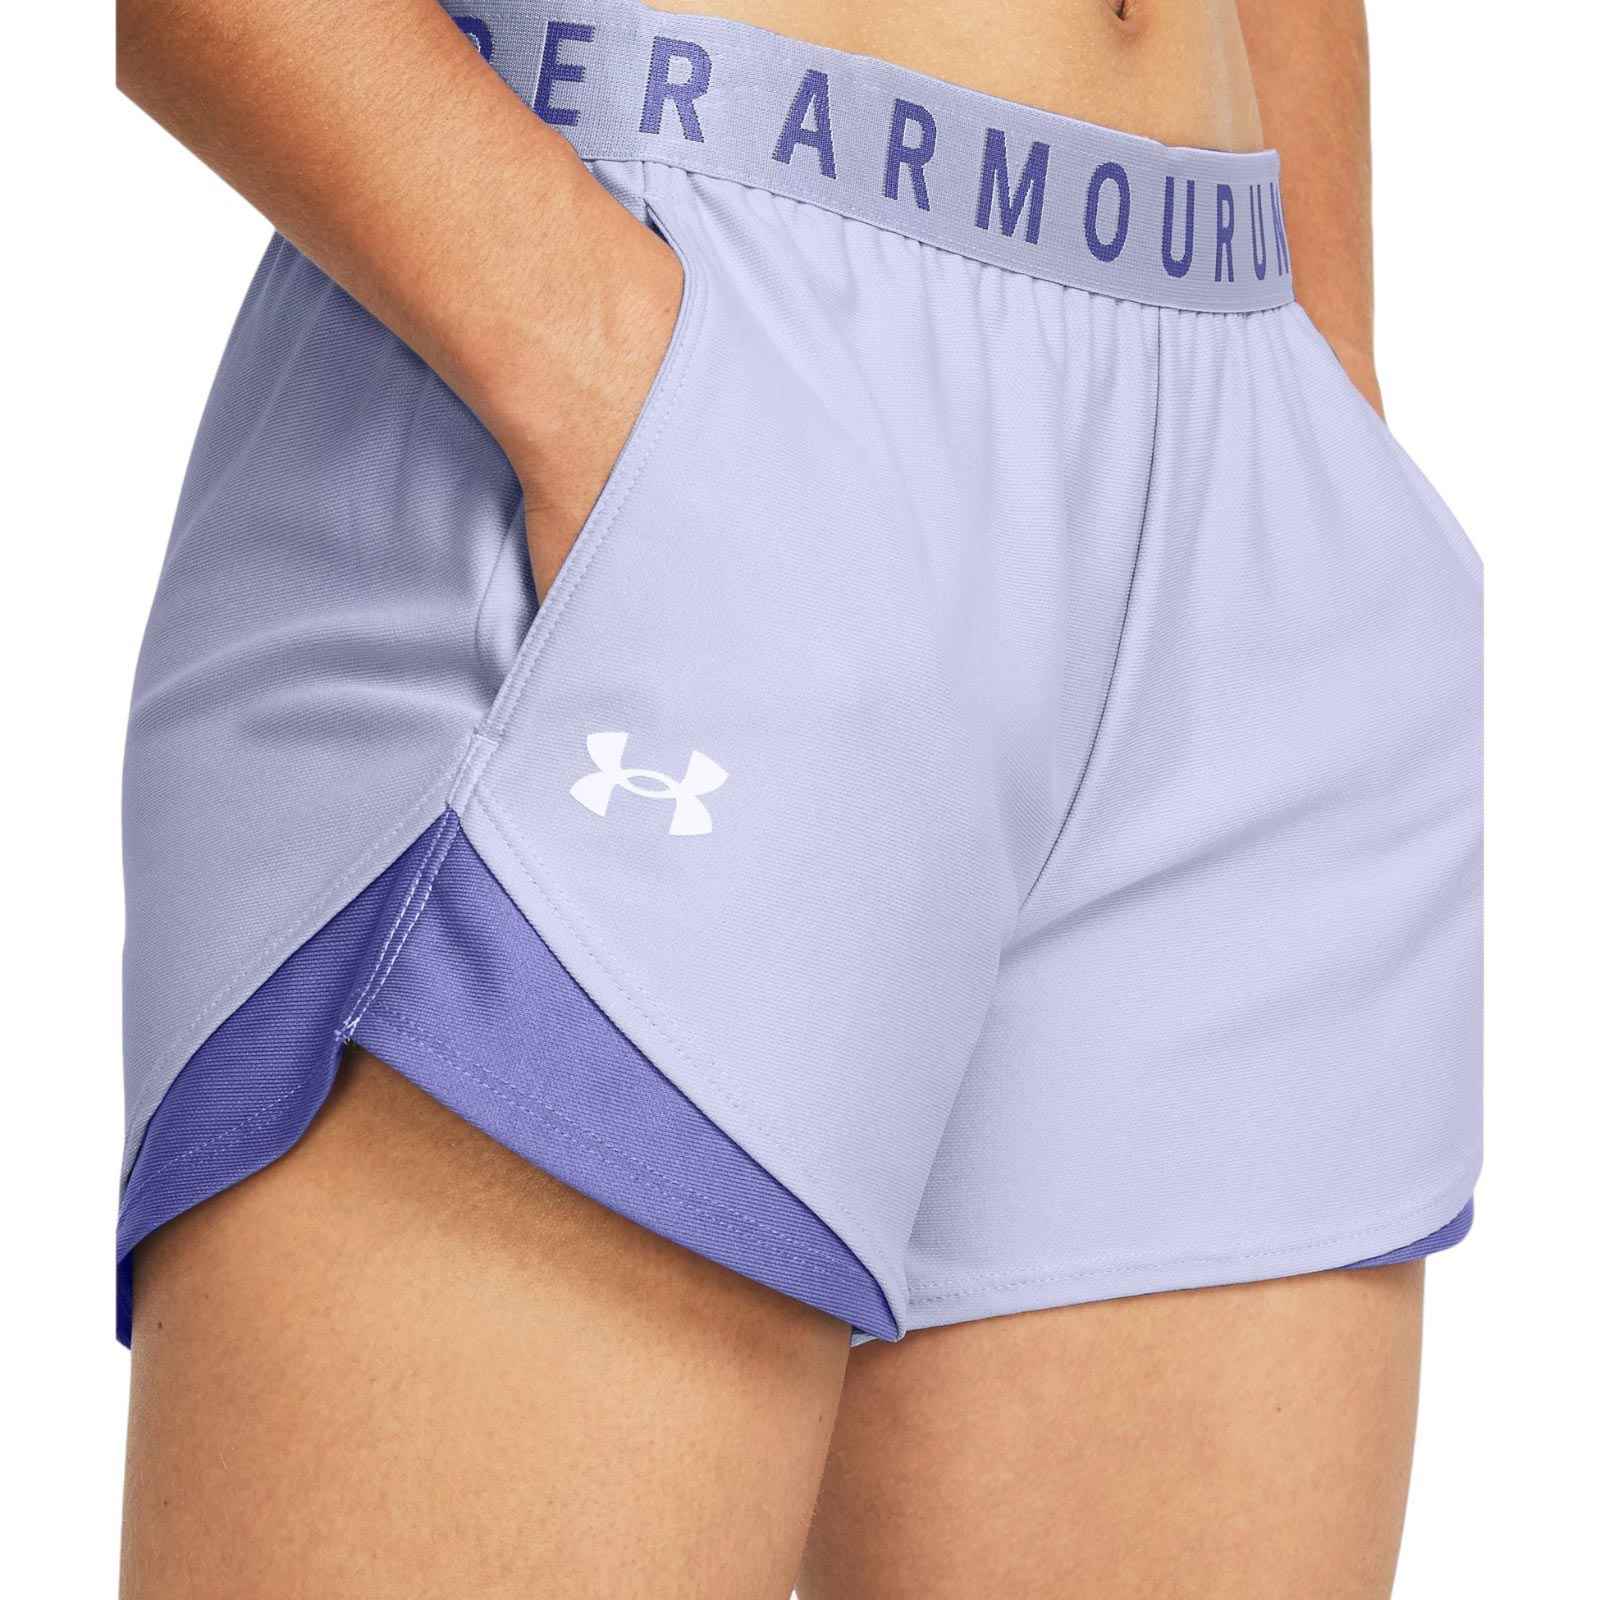 UNDER ARMOUR PLAY UP 3.0 WOMENS SHORTS 